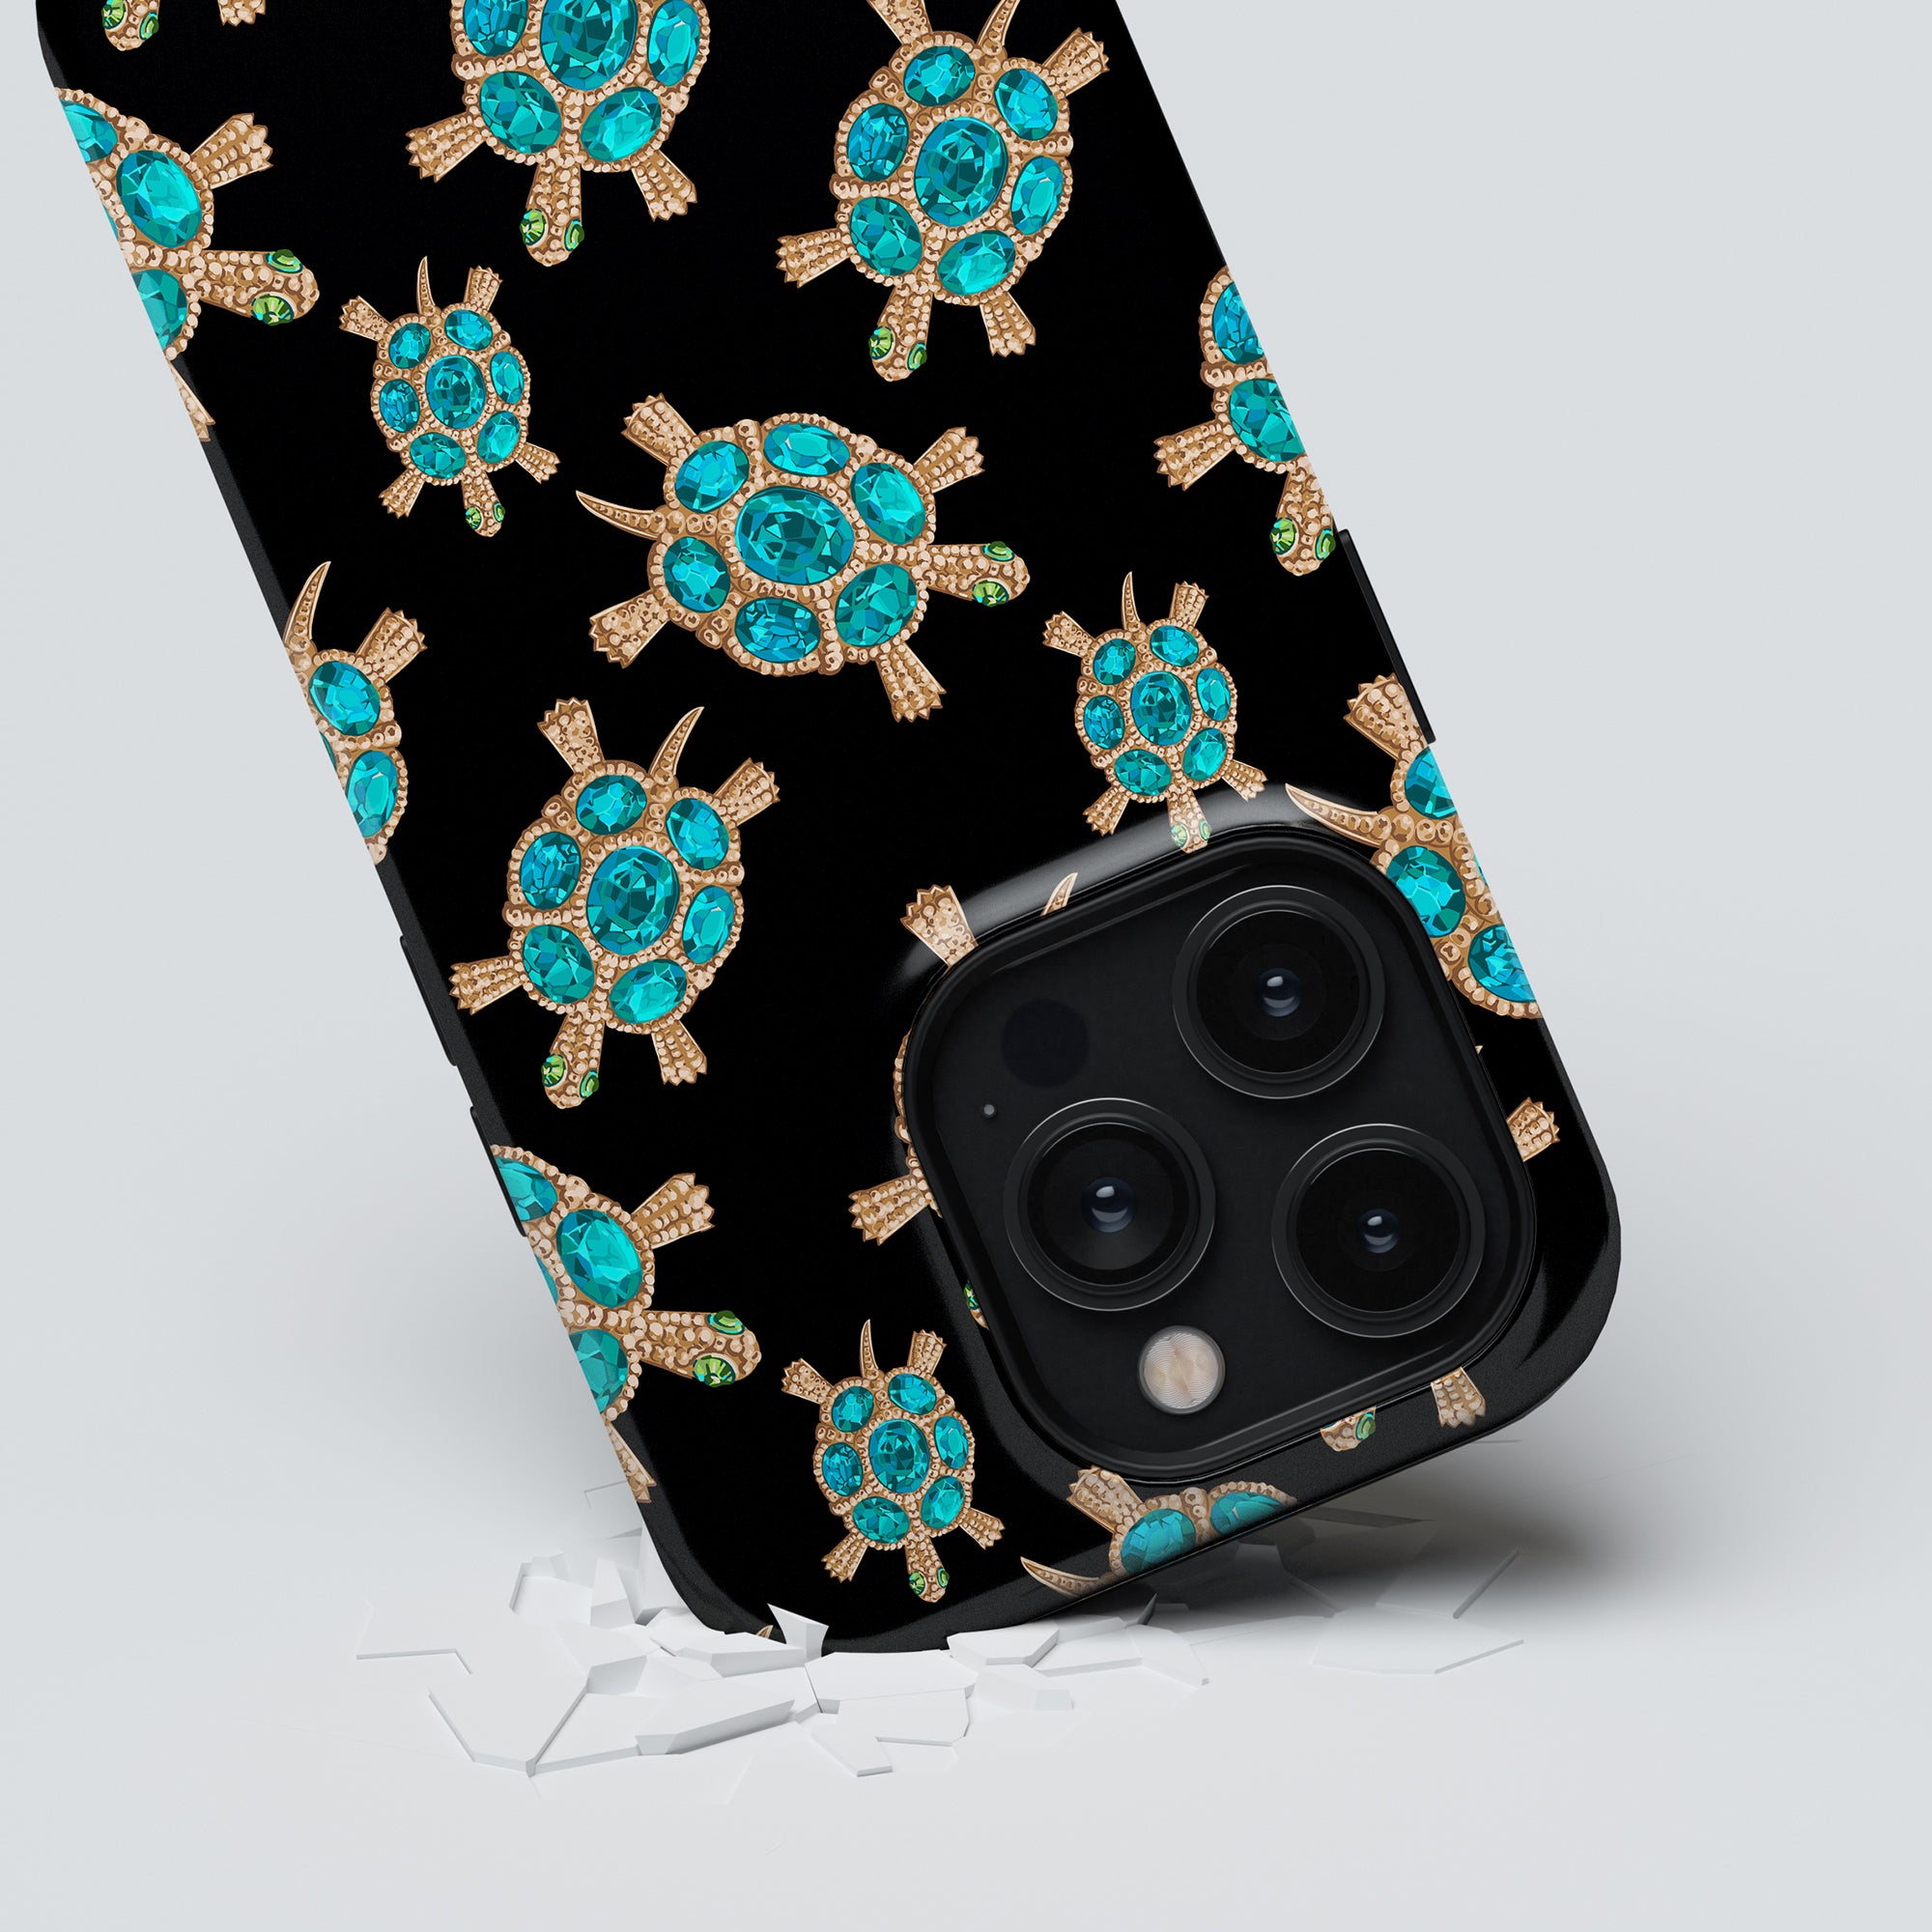 A smartphone with a triple-camera system crashing through a surface with a Diamond Turtle - Tough Case design.